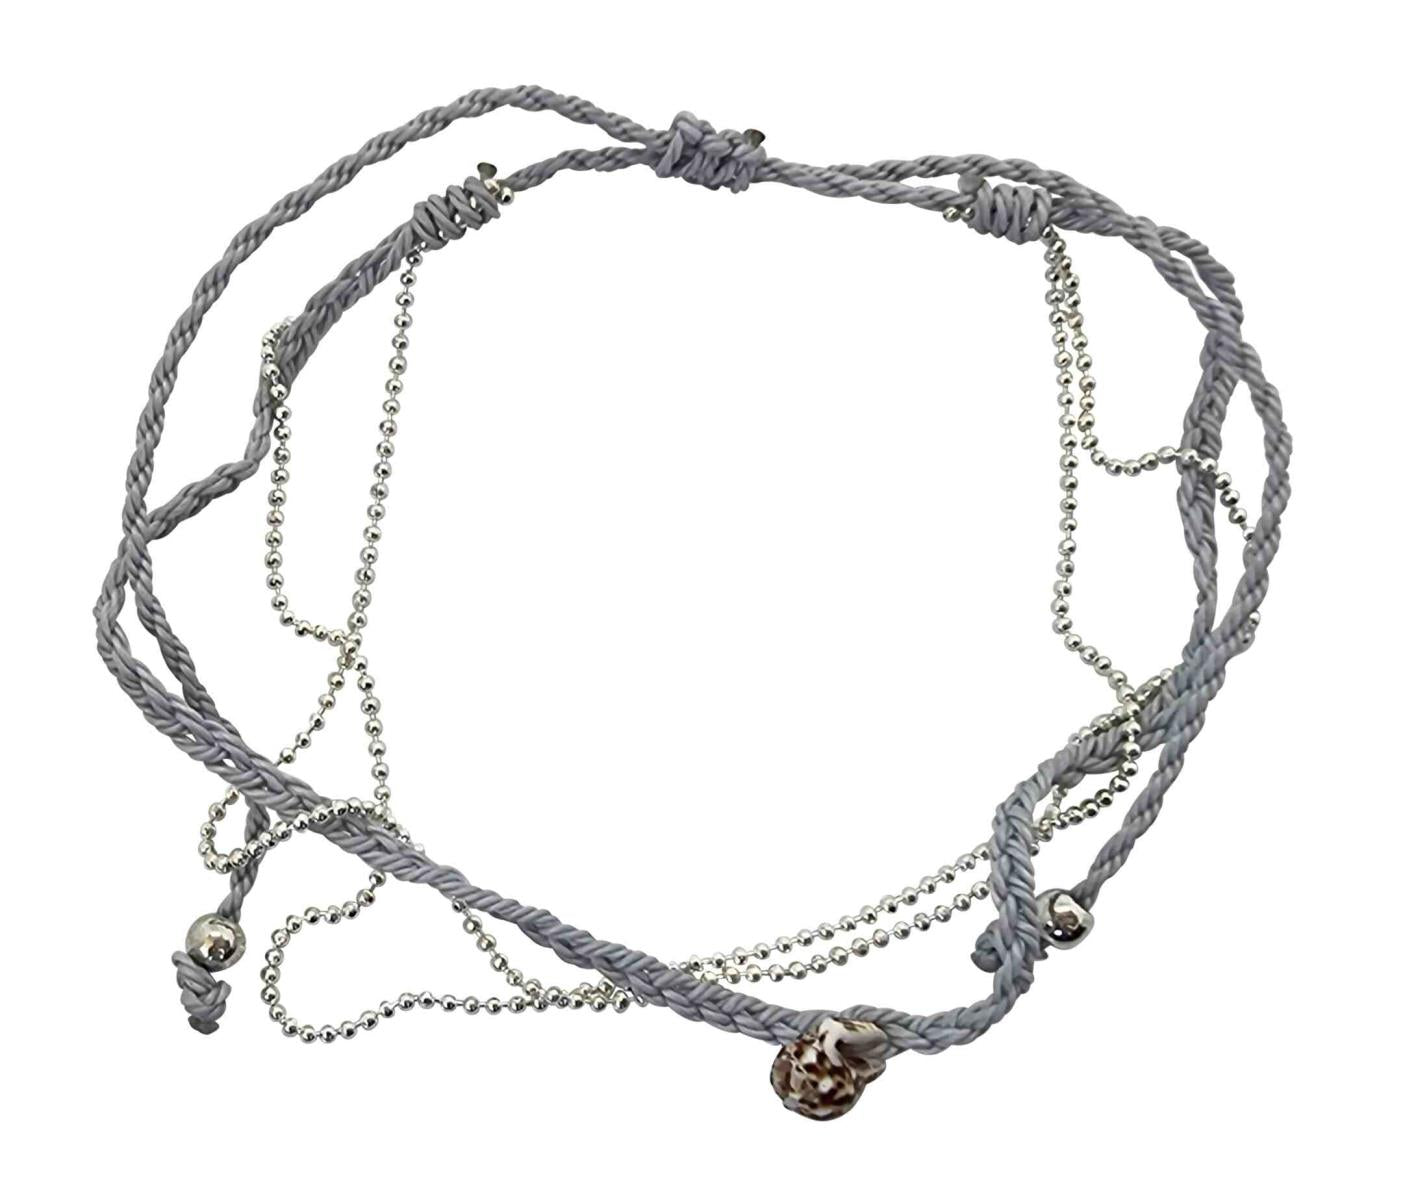 A207 Anklet  Shell and beads